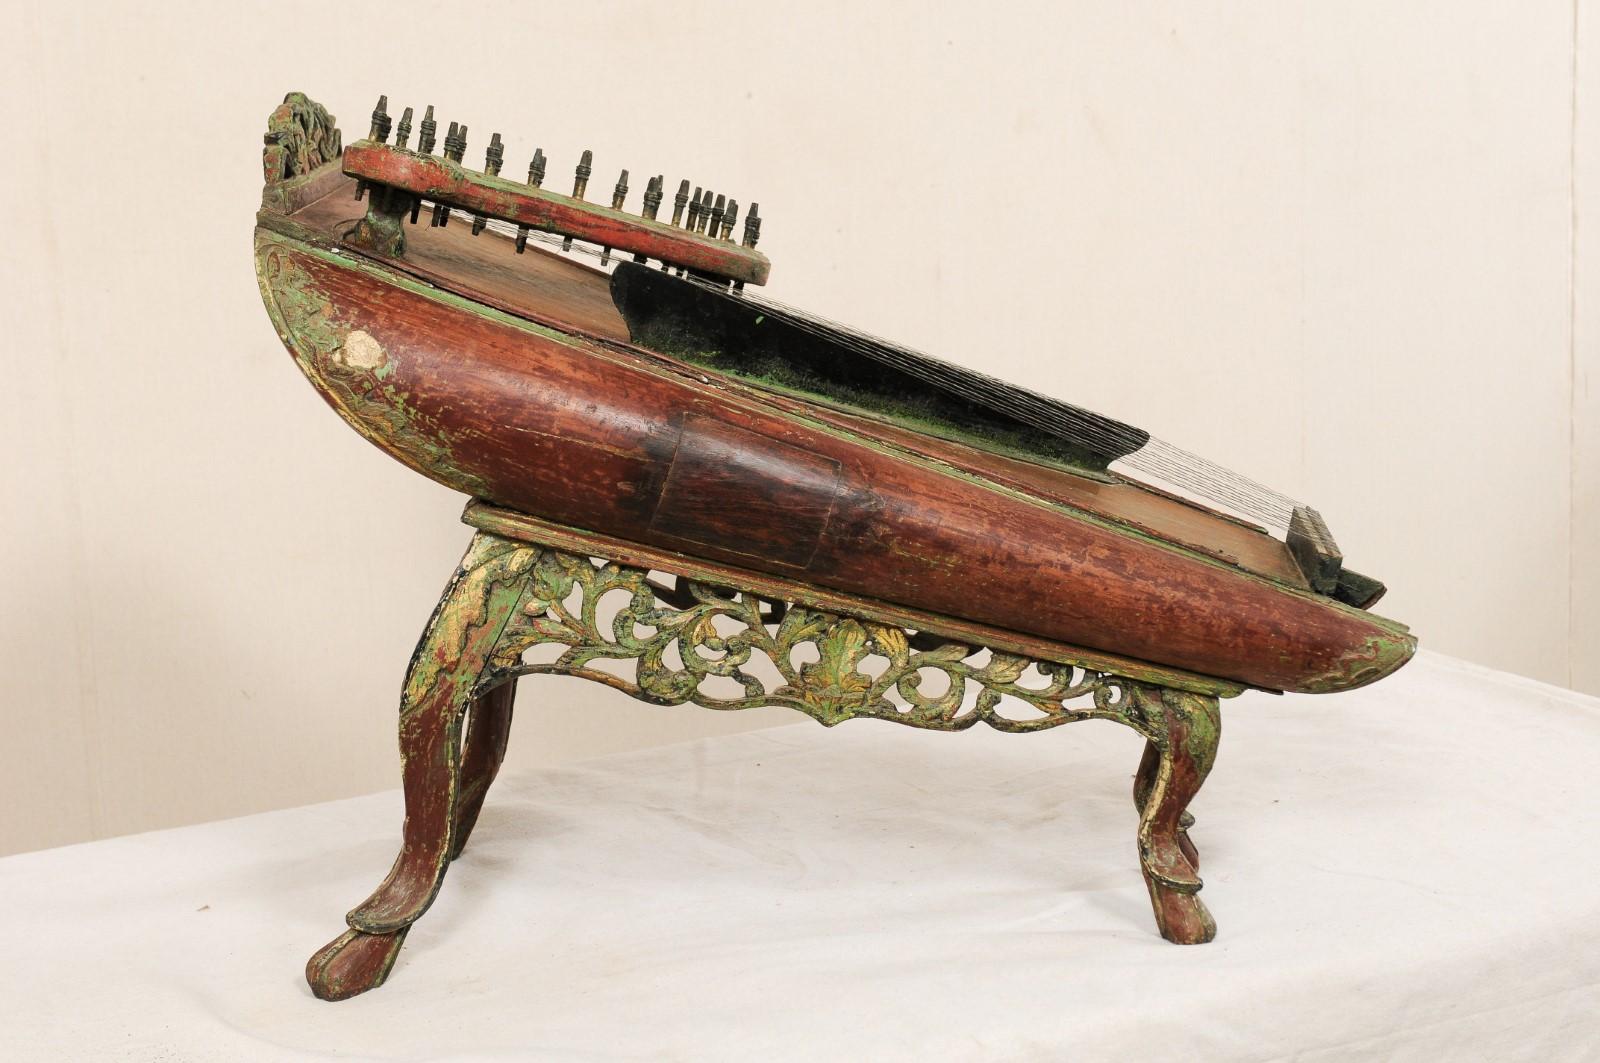 A traditional string musical instrument from Java, late 19th century. This antique celempung from Java, Indonesia has a beautifully decorated wood body, with pierced and carved skirt undercarriage and raised upon legs that terminate into hoof feet.